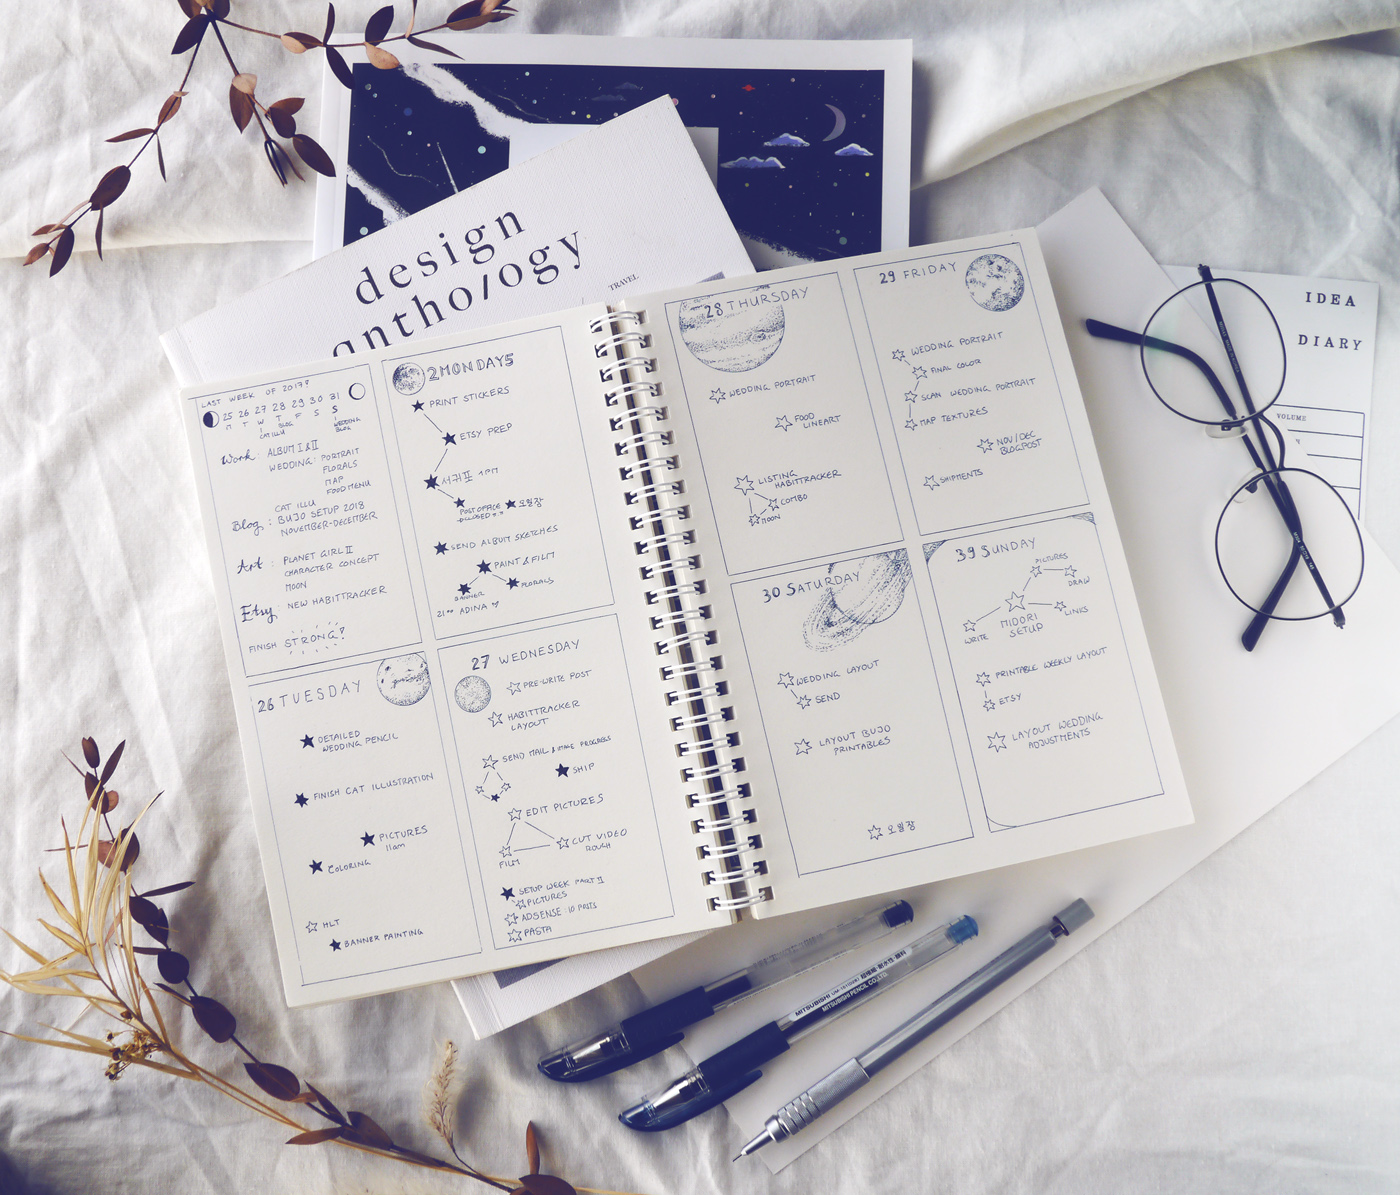 New To Bujo? Here Is The Easiest Bullet Journal Guide You'll Ever Find